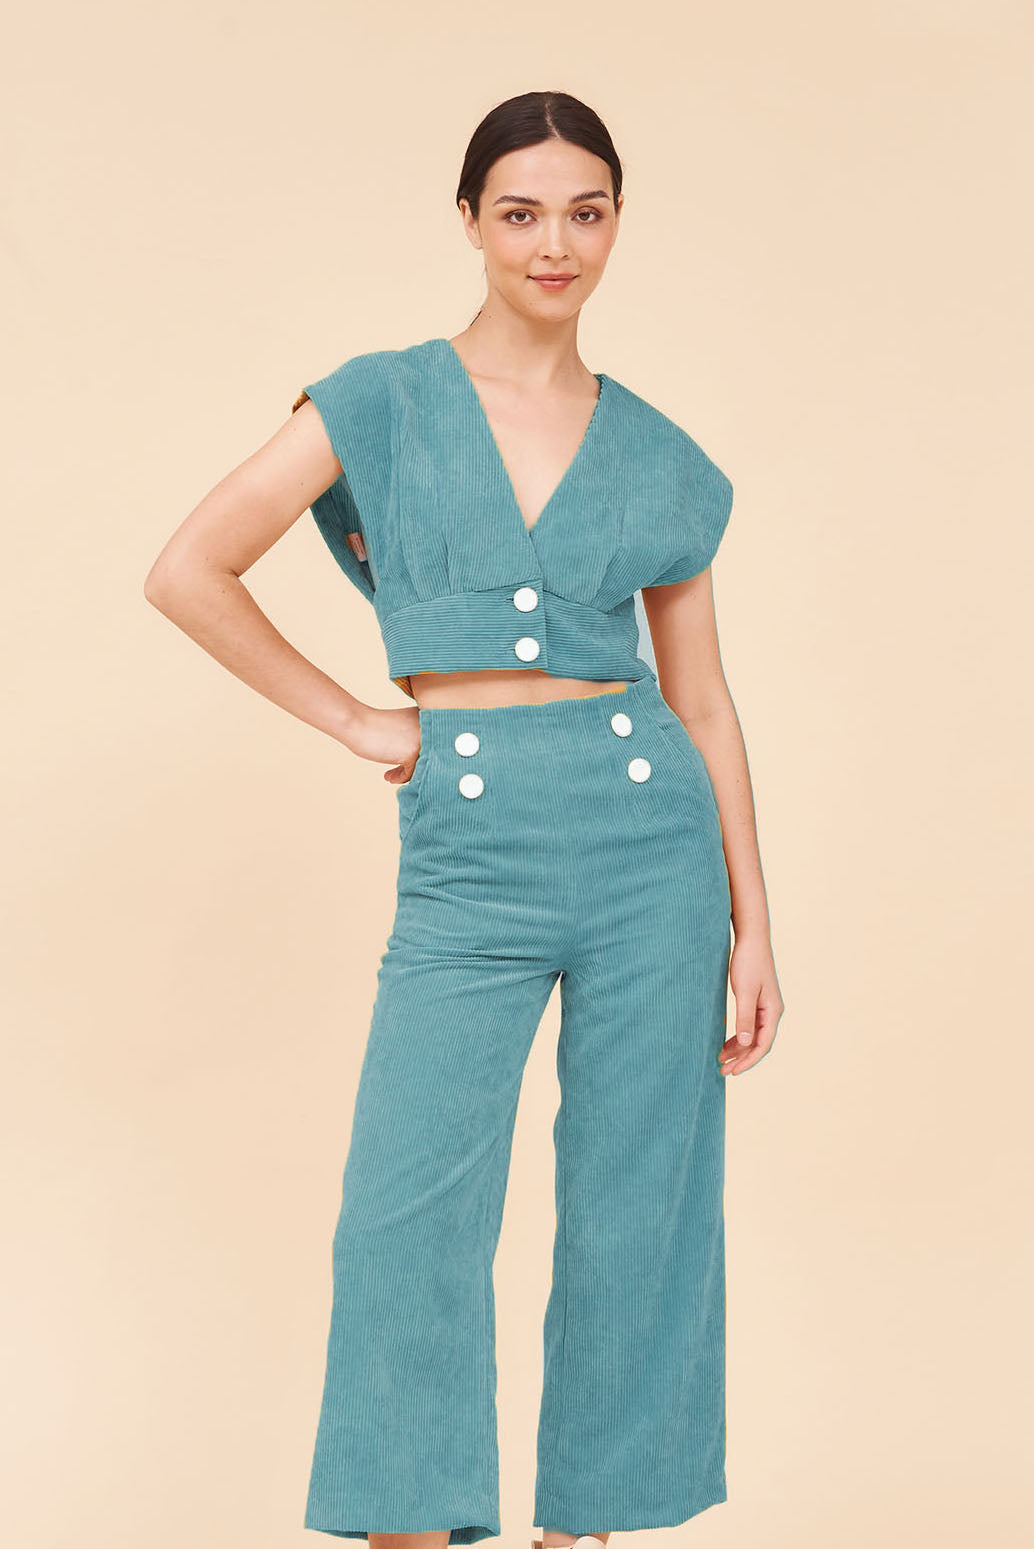 "SUNSHINE" Plunging V neck Cropped Top With Empire Waist in Aqua Blue Cotton Corduroy